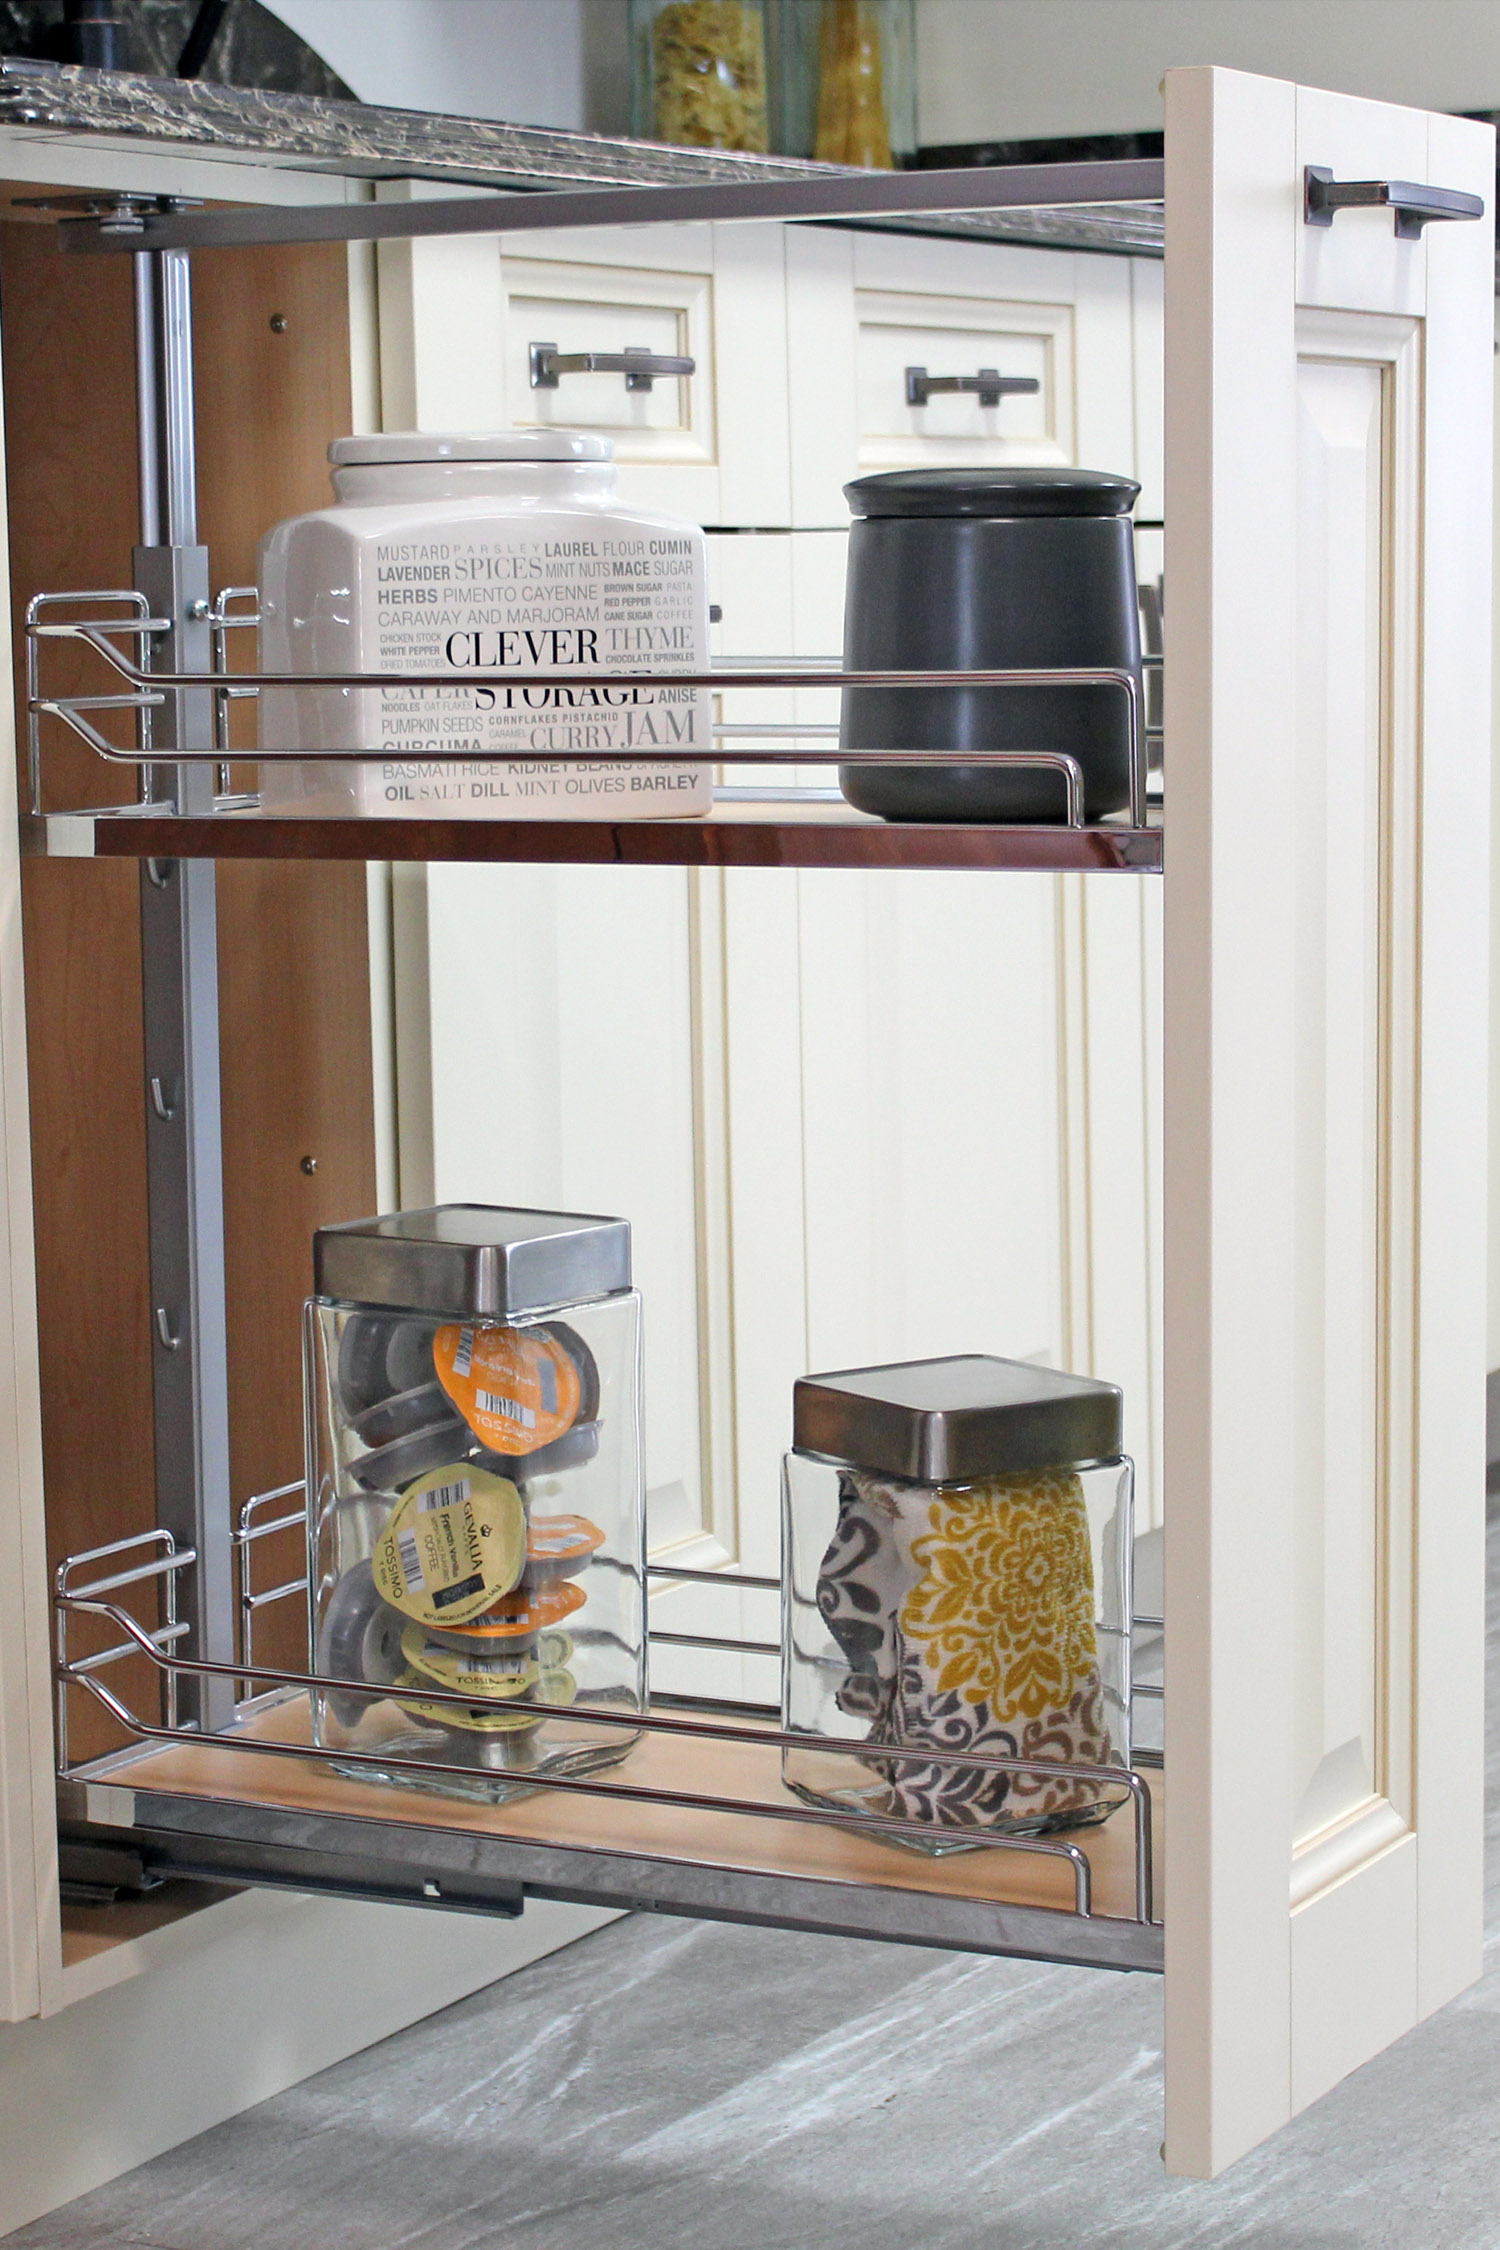 How to Add a Pullout Spice Rack - New Hampshire Home Magazine